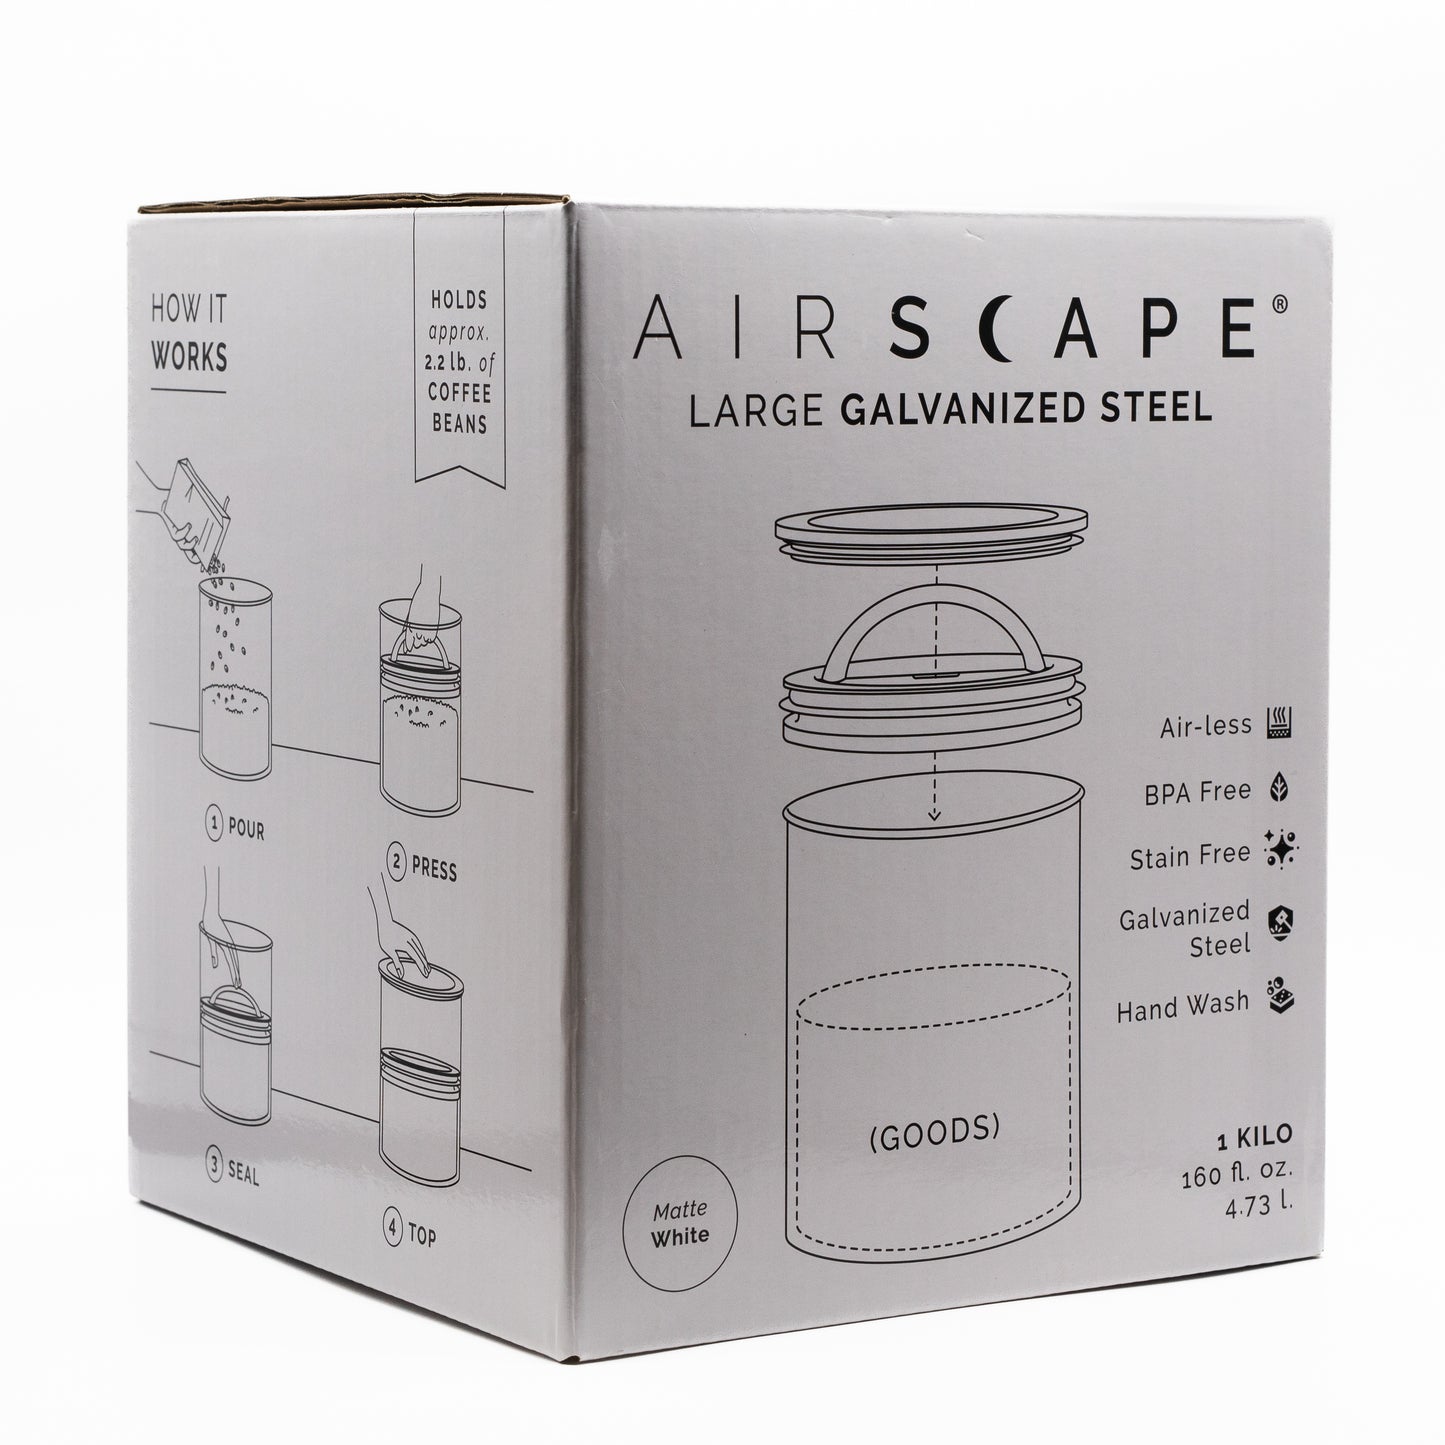 Airscape Kilo 8" Large Coffee Canister + 500g of the hustler coffee - dhc coffee co.